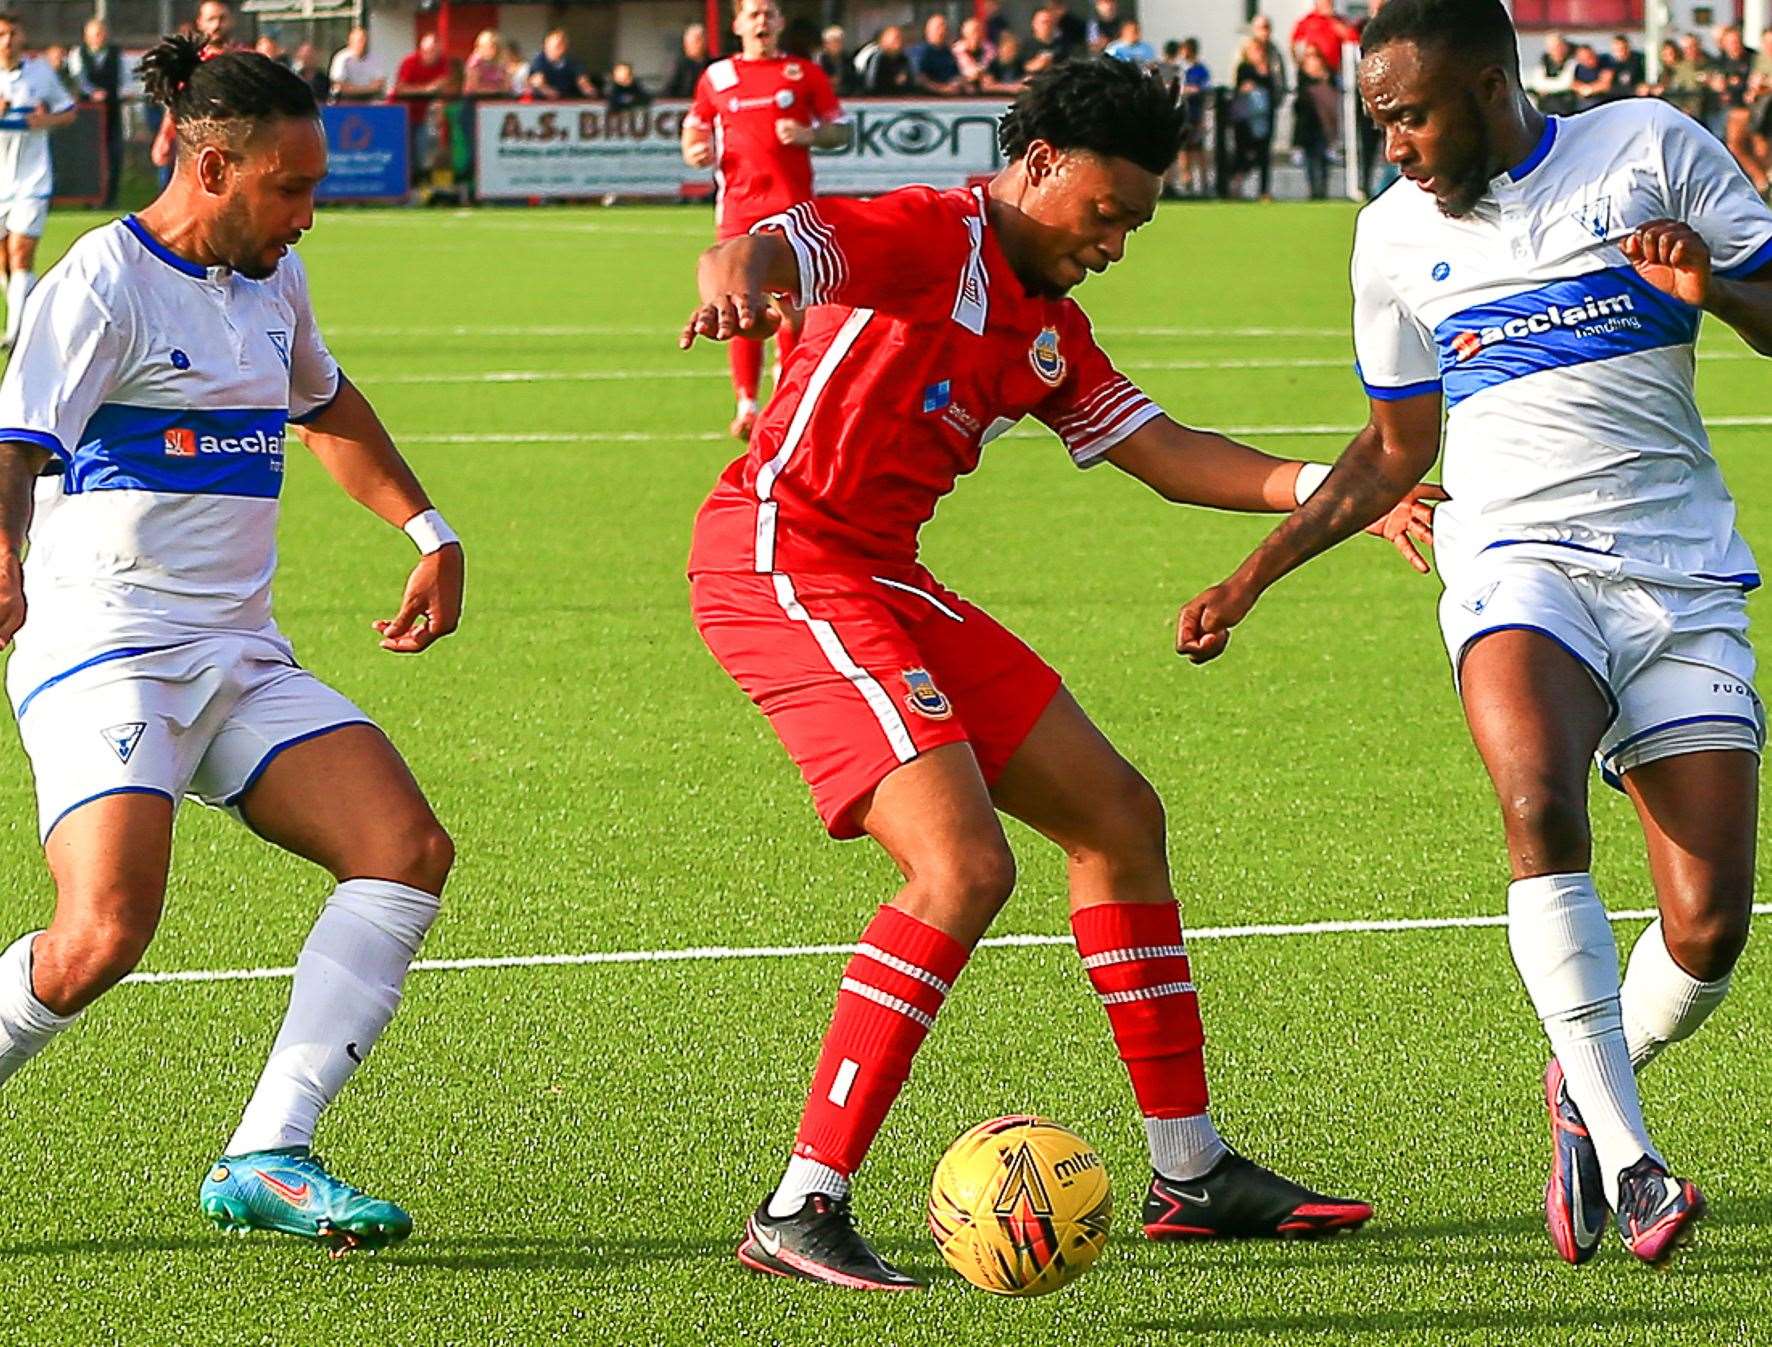 Stephen Okoh takes on two Erith players. Picture: Les Biggs